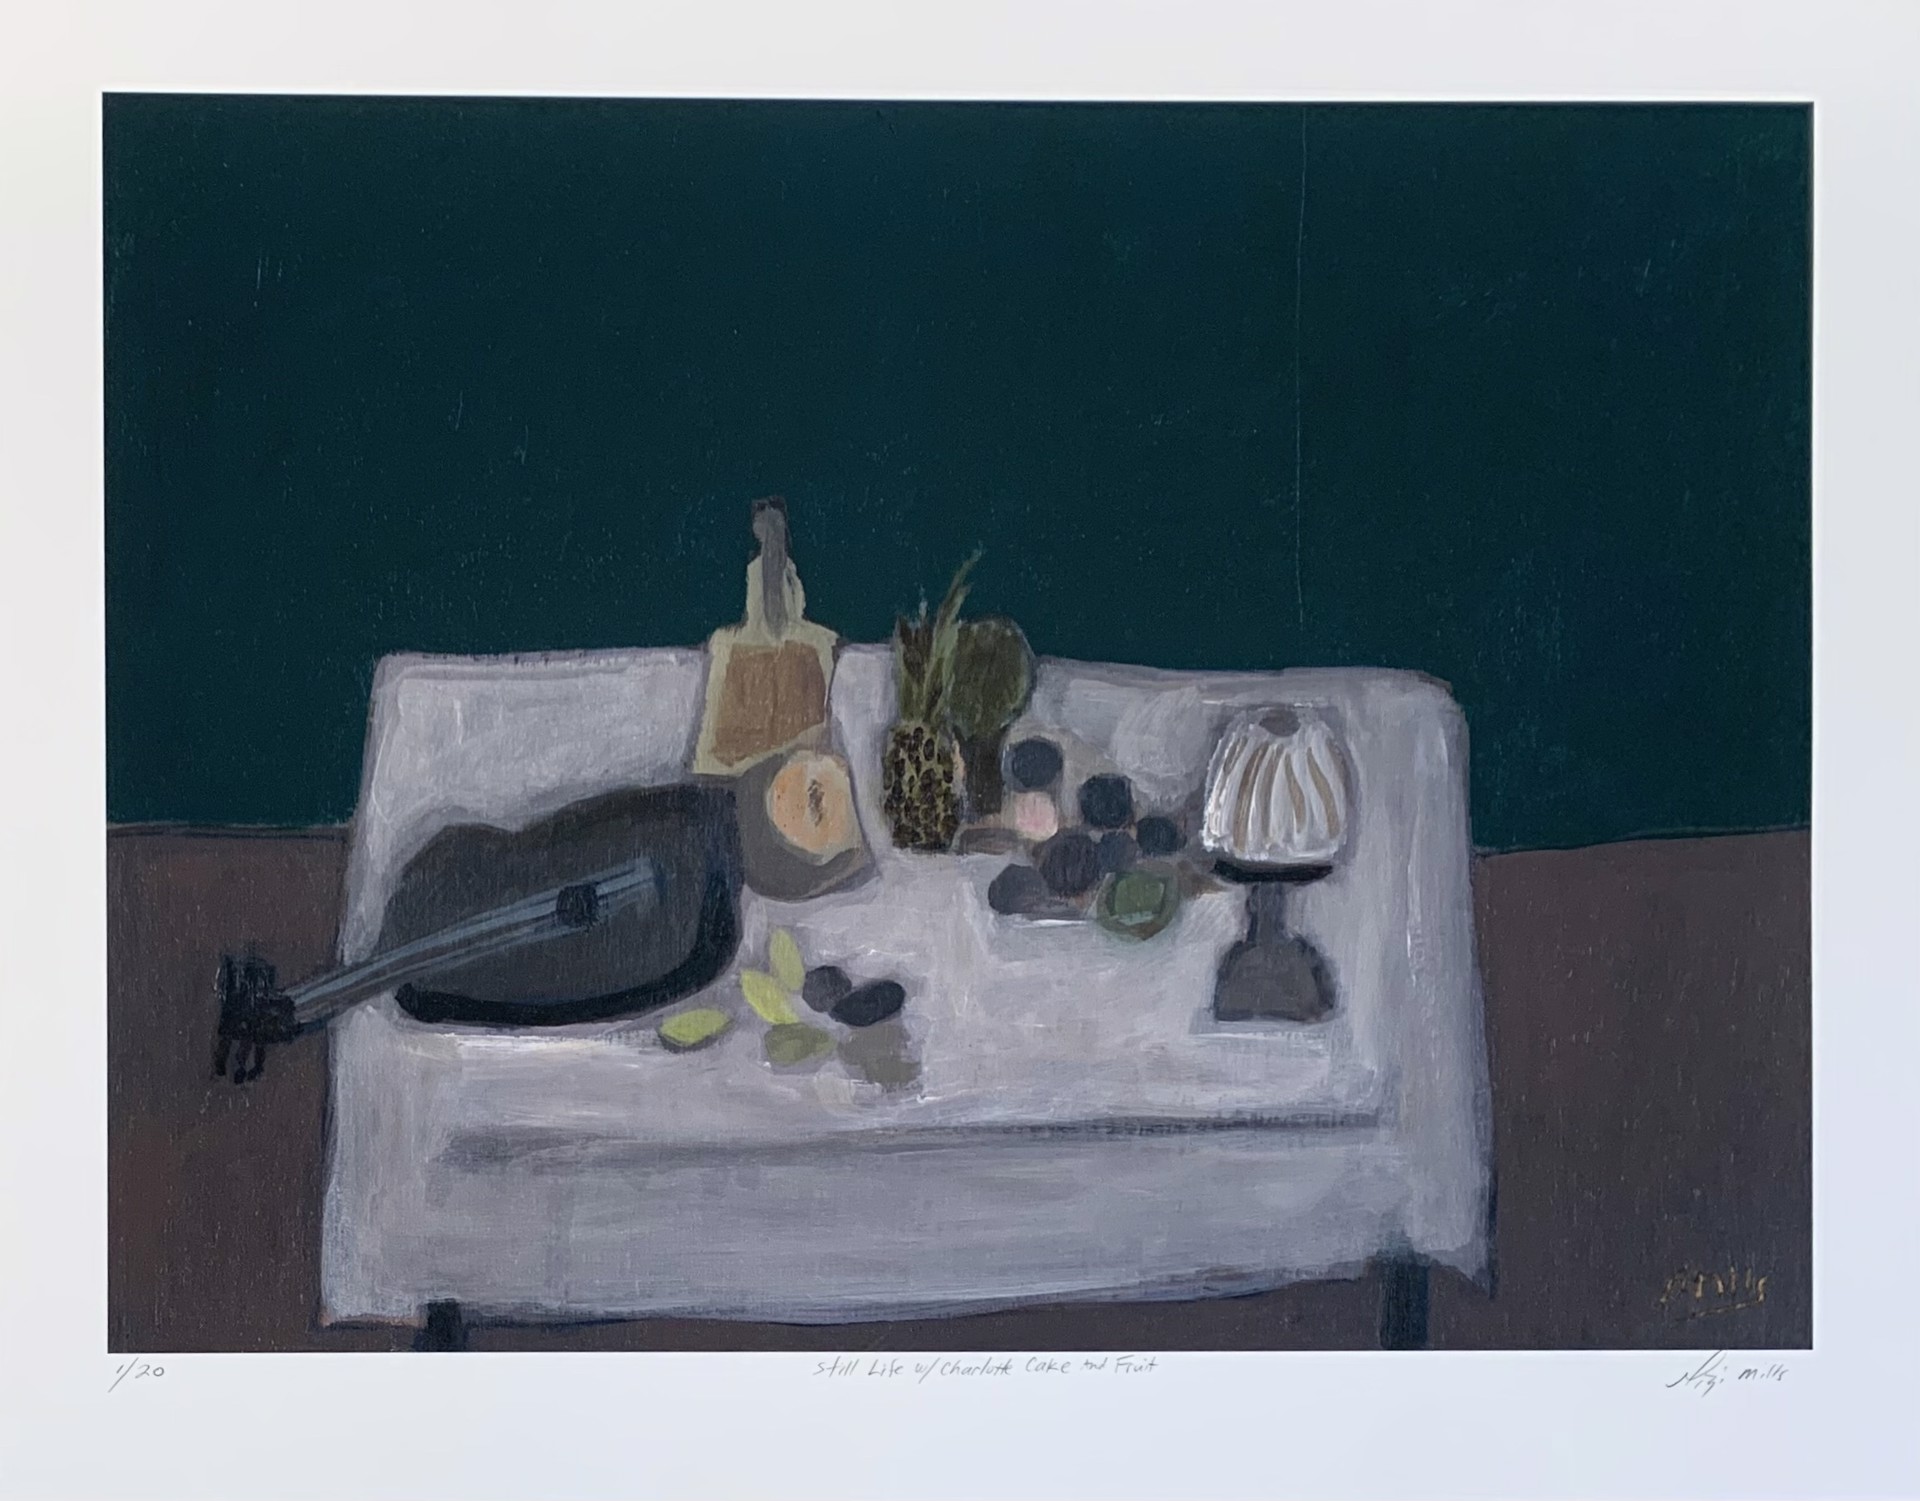 Still Life with Charlotte Cake and Fruit by Gigi Prints